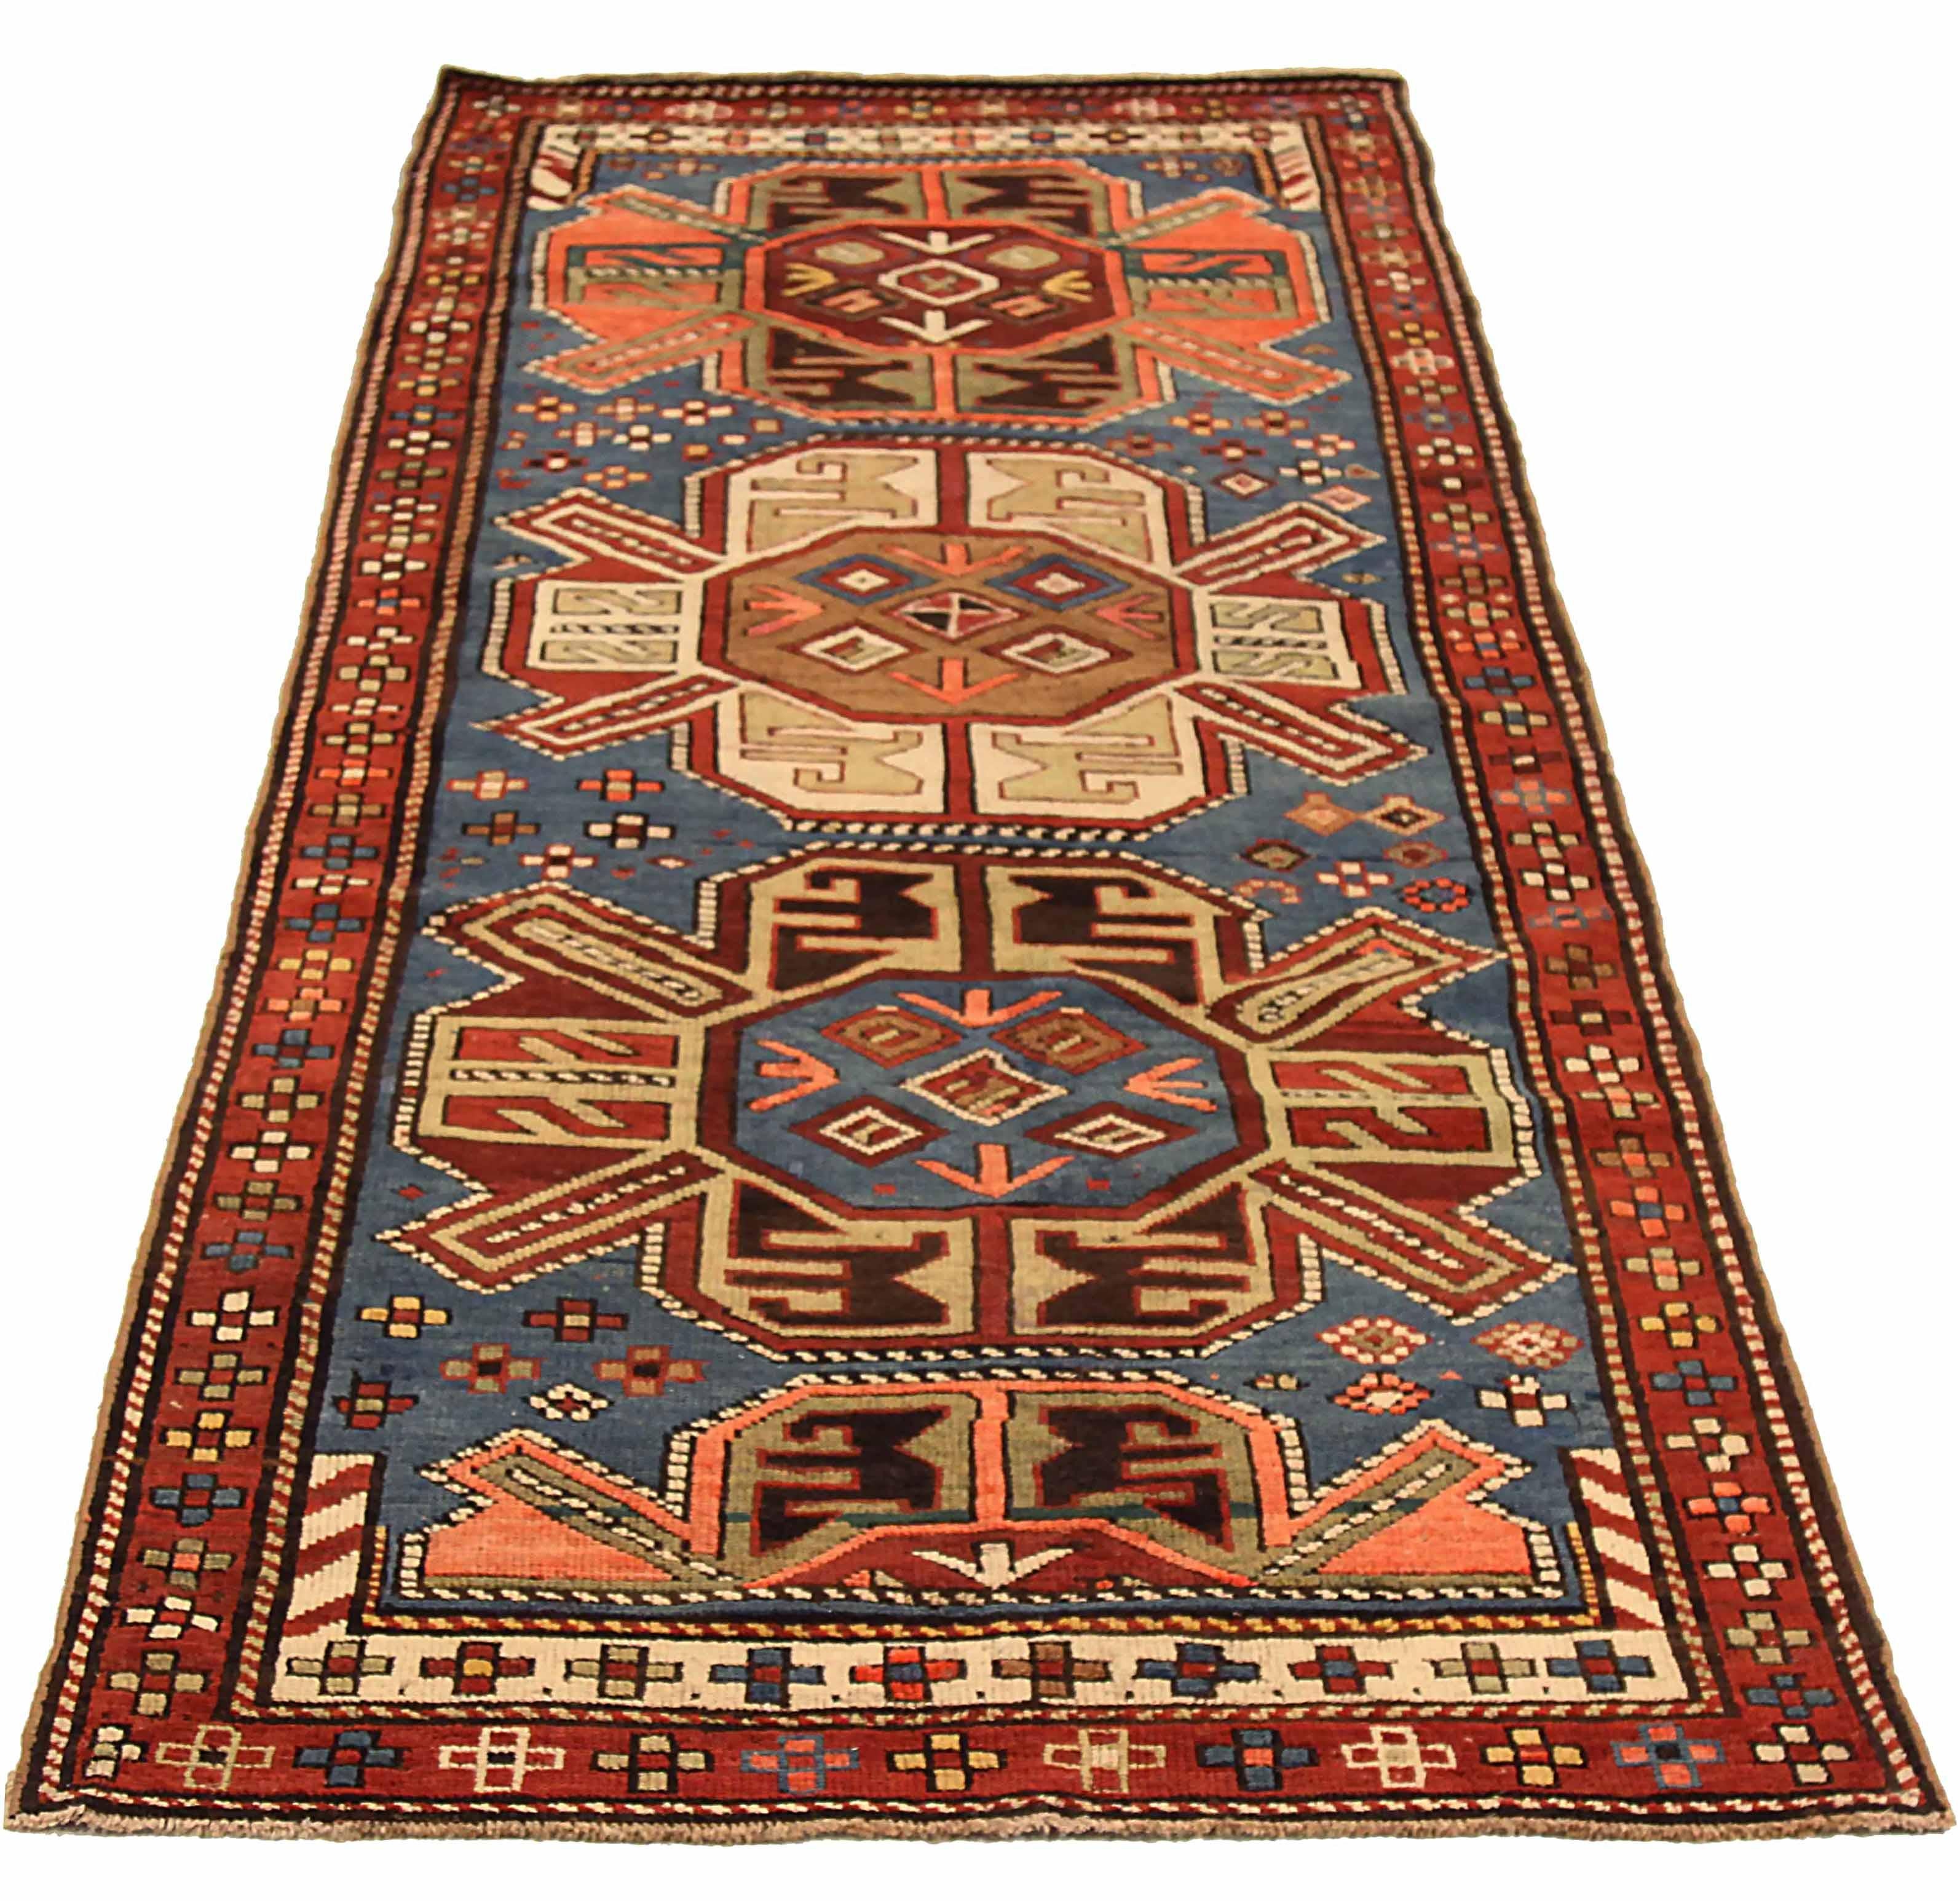 ntique Russian area rug handwoven from the finest sheep’s wool. It’s colored with all-natural vegetable dyes that are safe for humans and pets. It’s a traditional Karebagh design handwoven by expert artisans. It’s a lovely area rug that can be